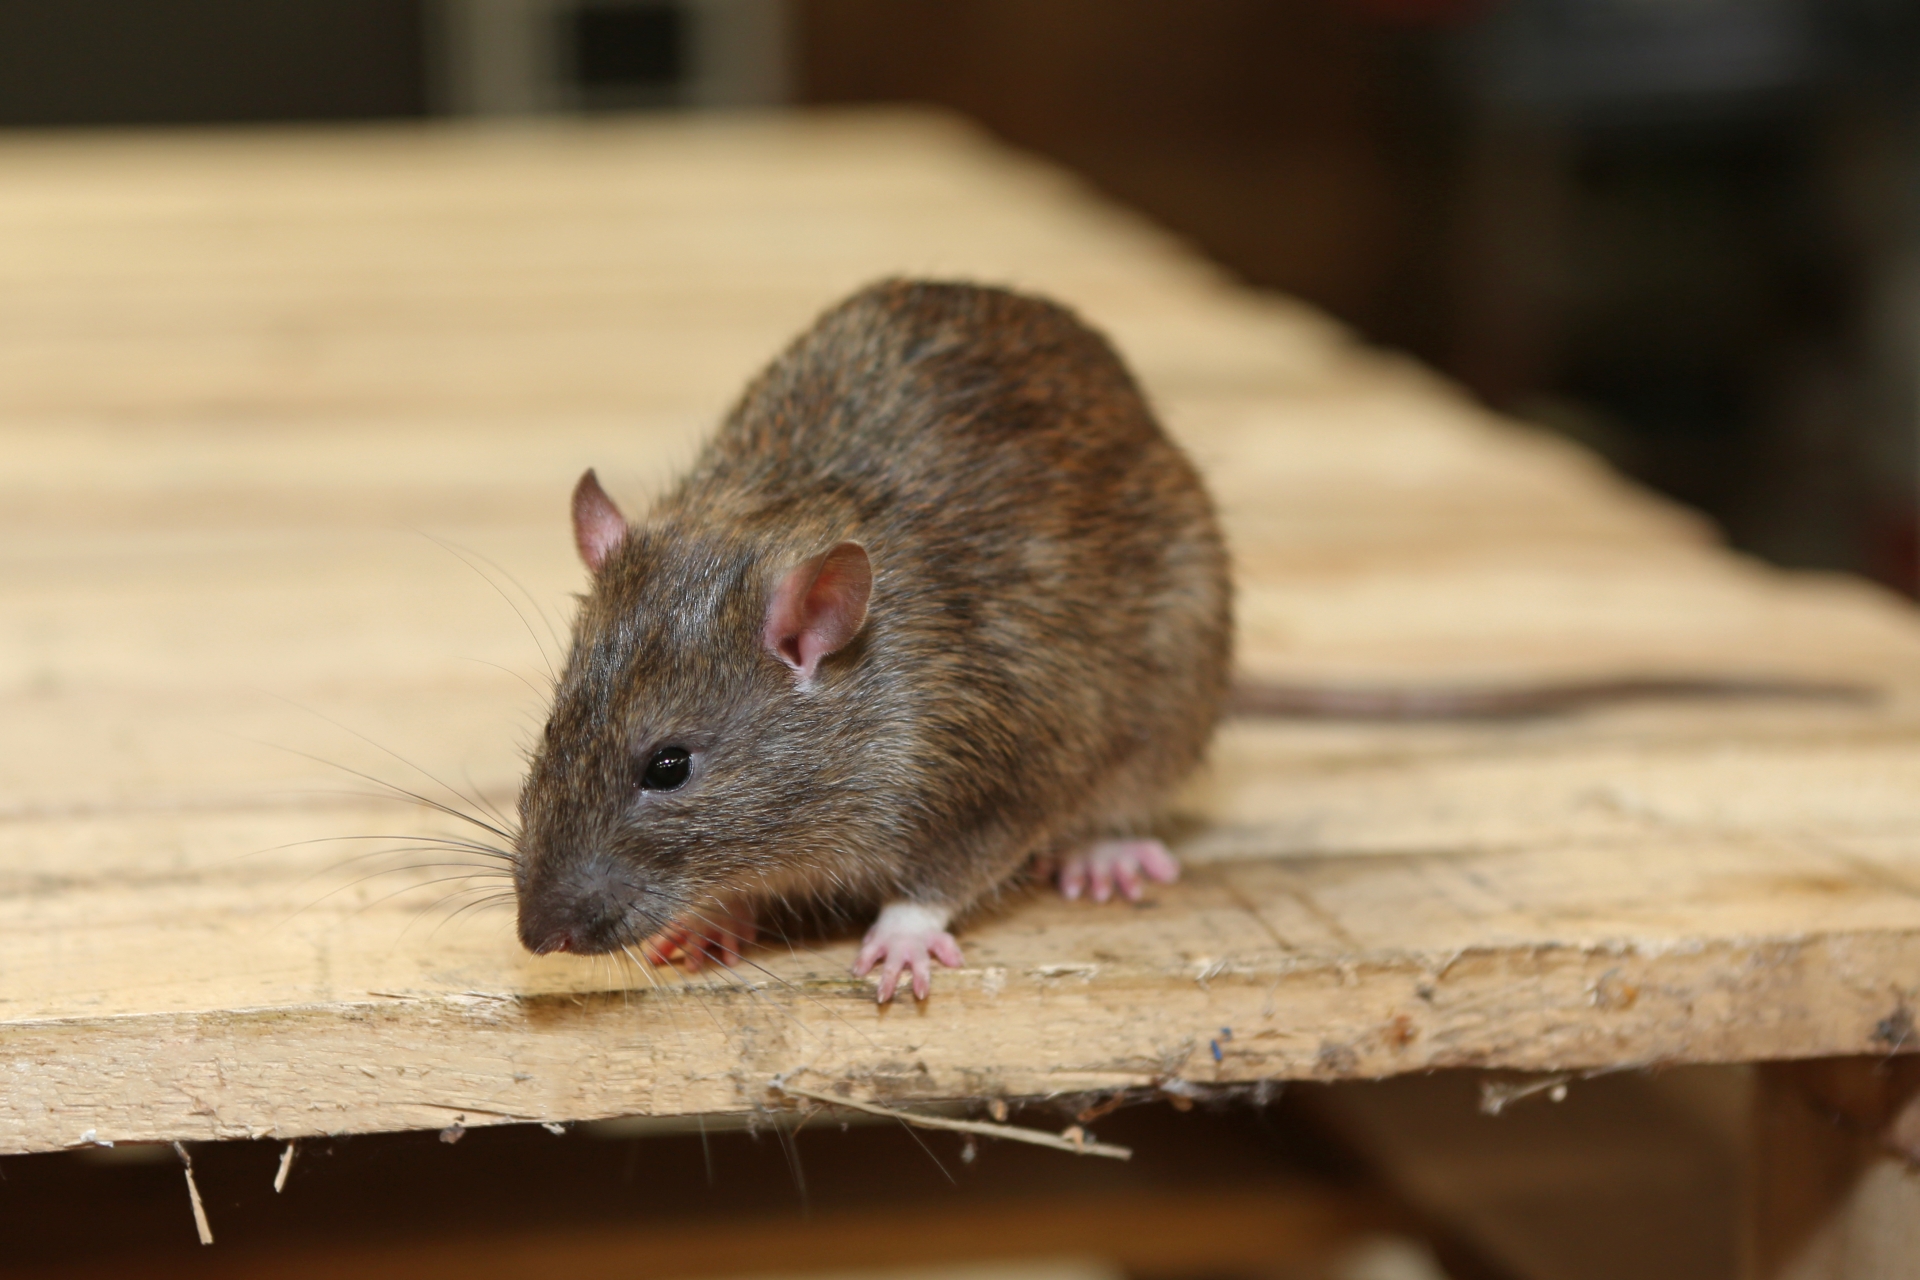 Rat Infestation, Pest Control in Plaistow, E13. Call Now 020 8166 9746